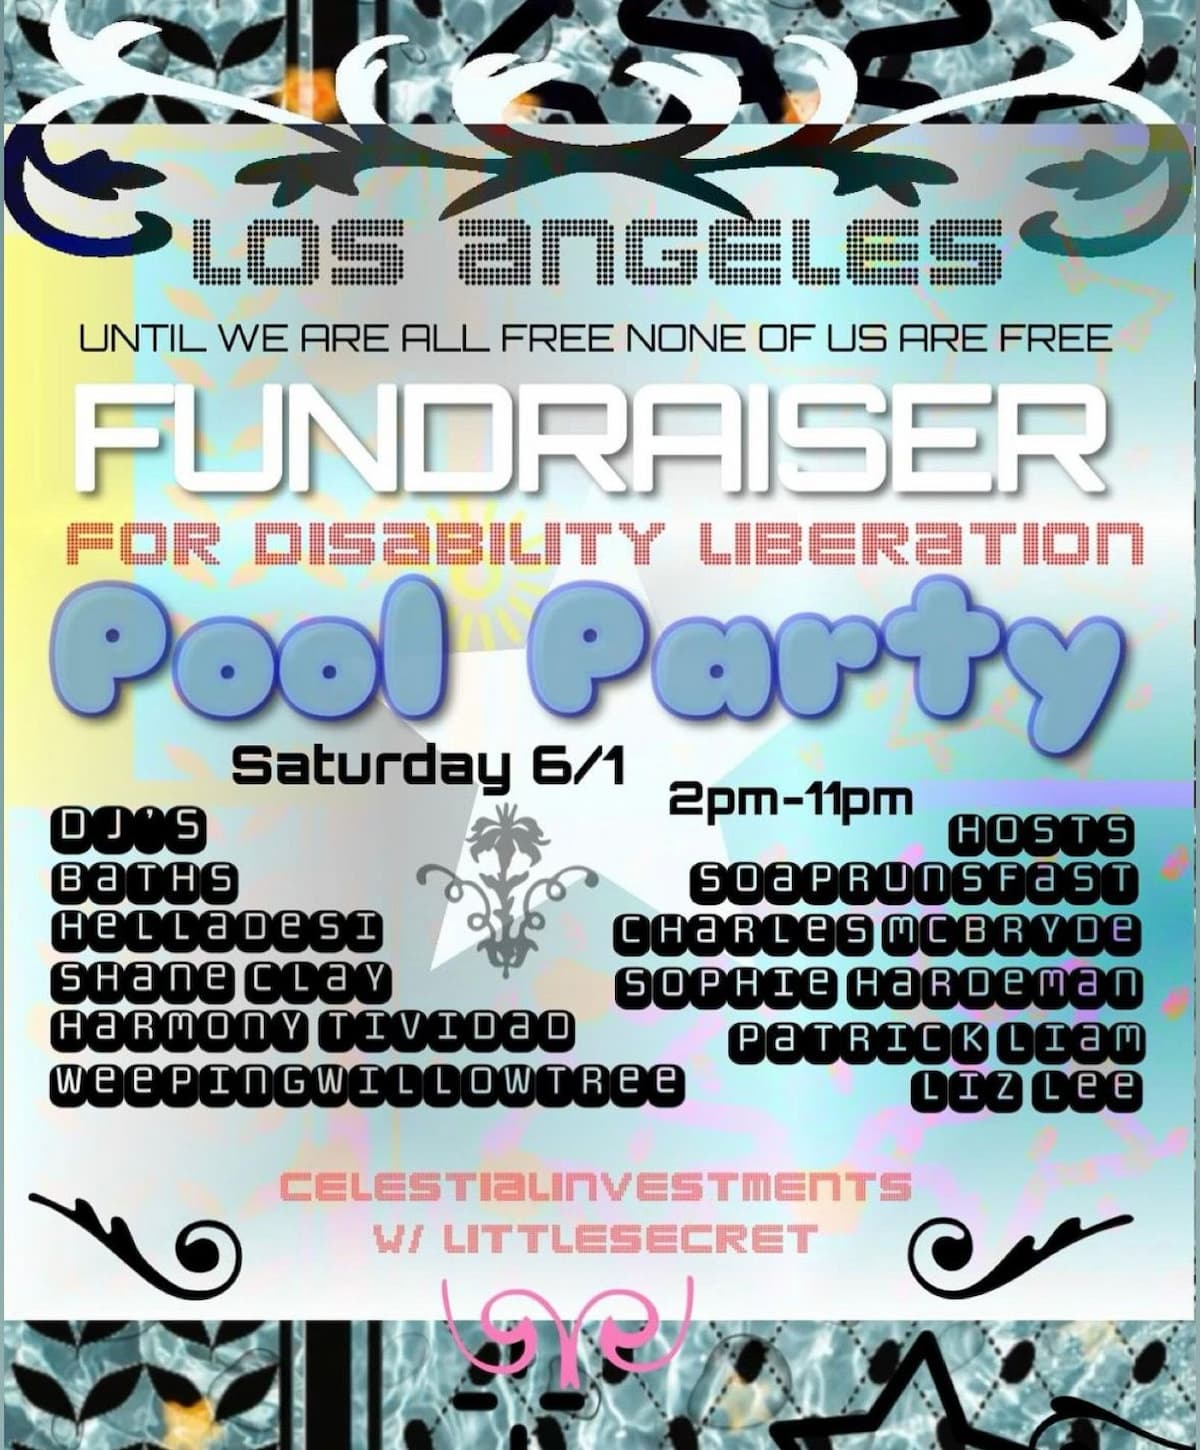 Pool Party for Disability Liberation